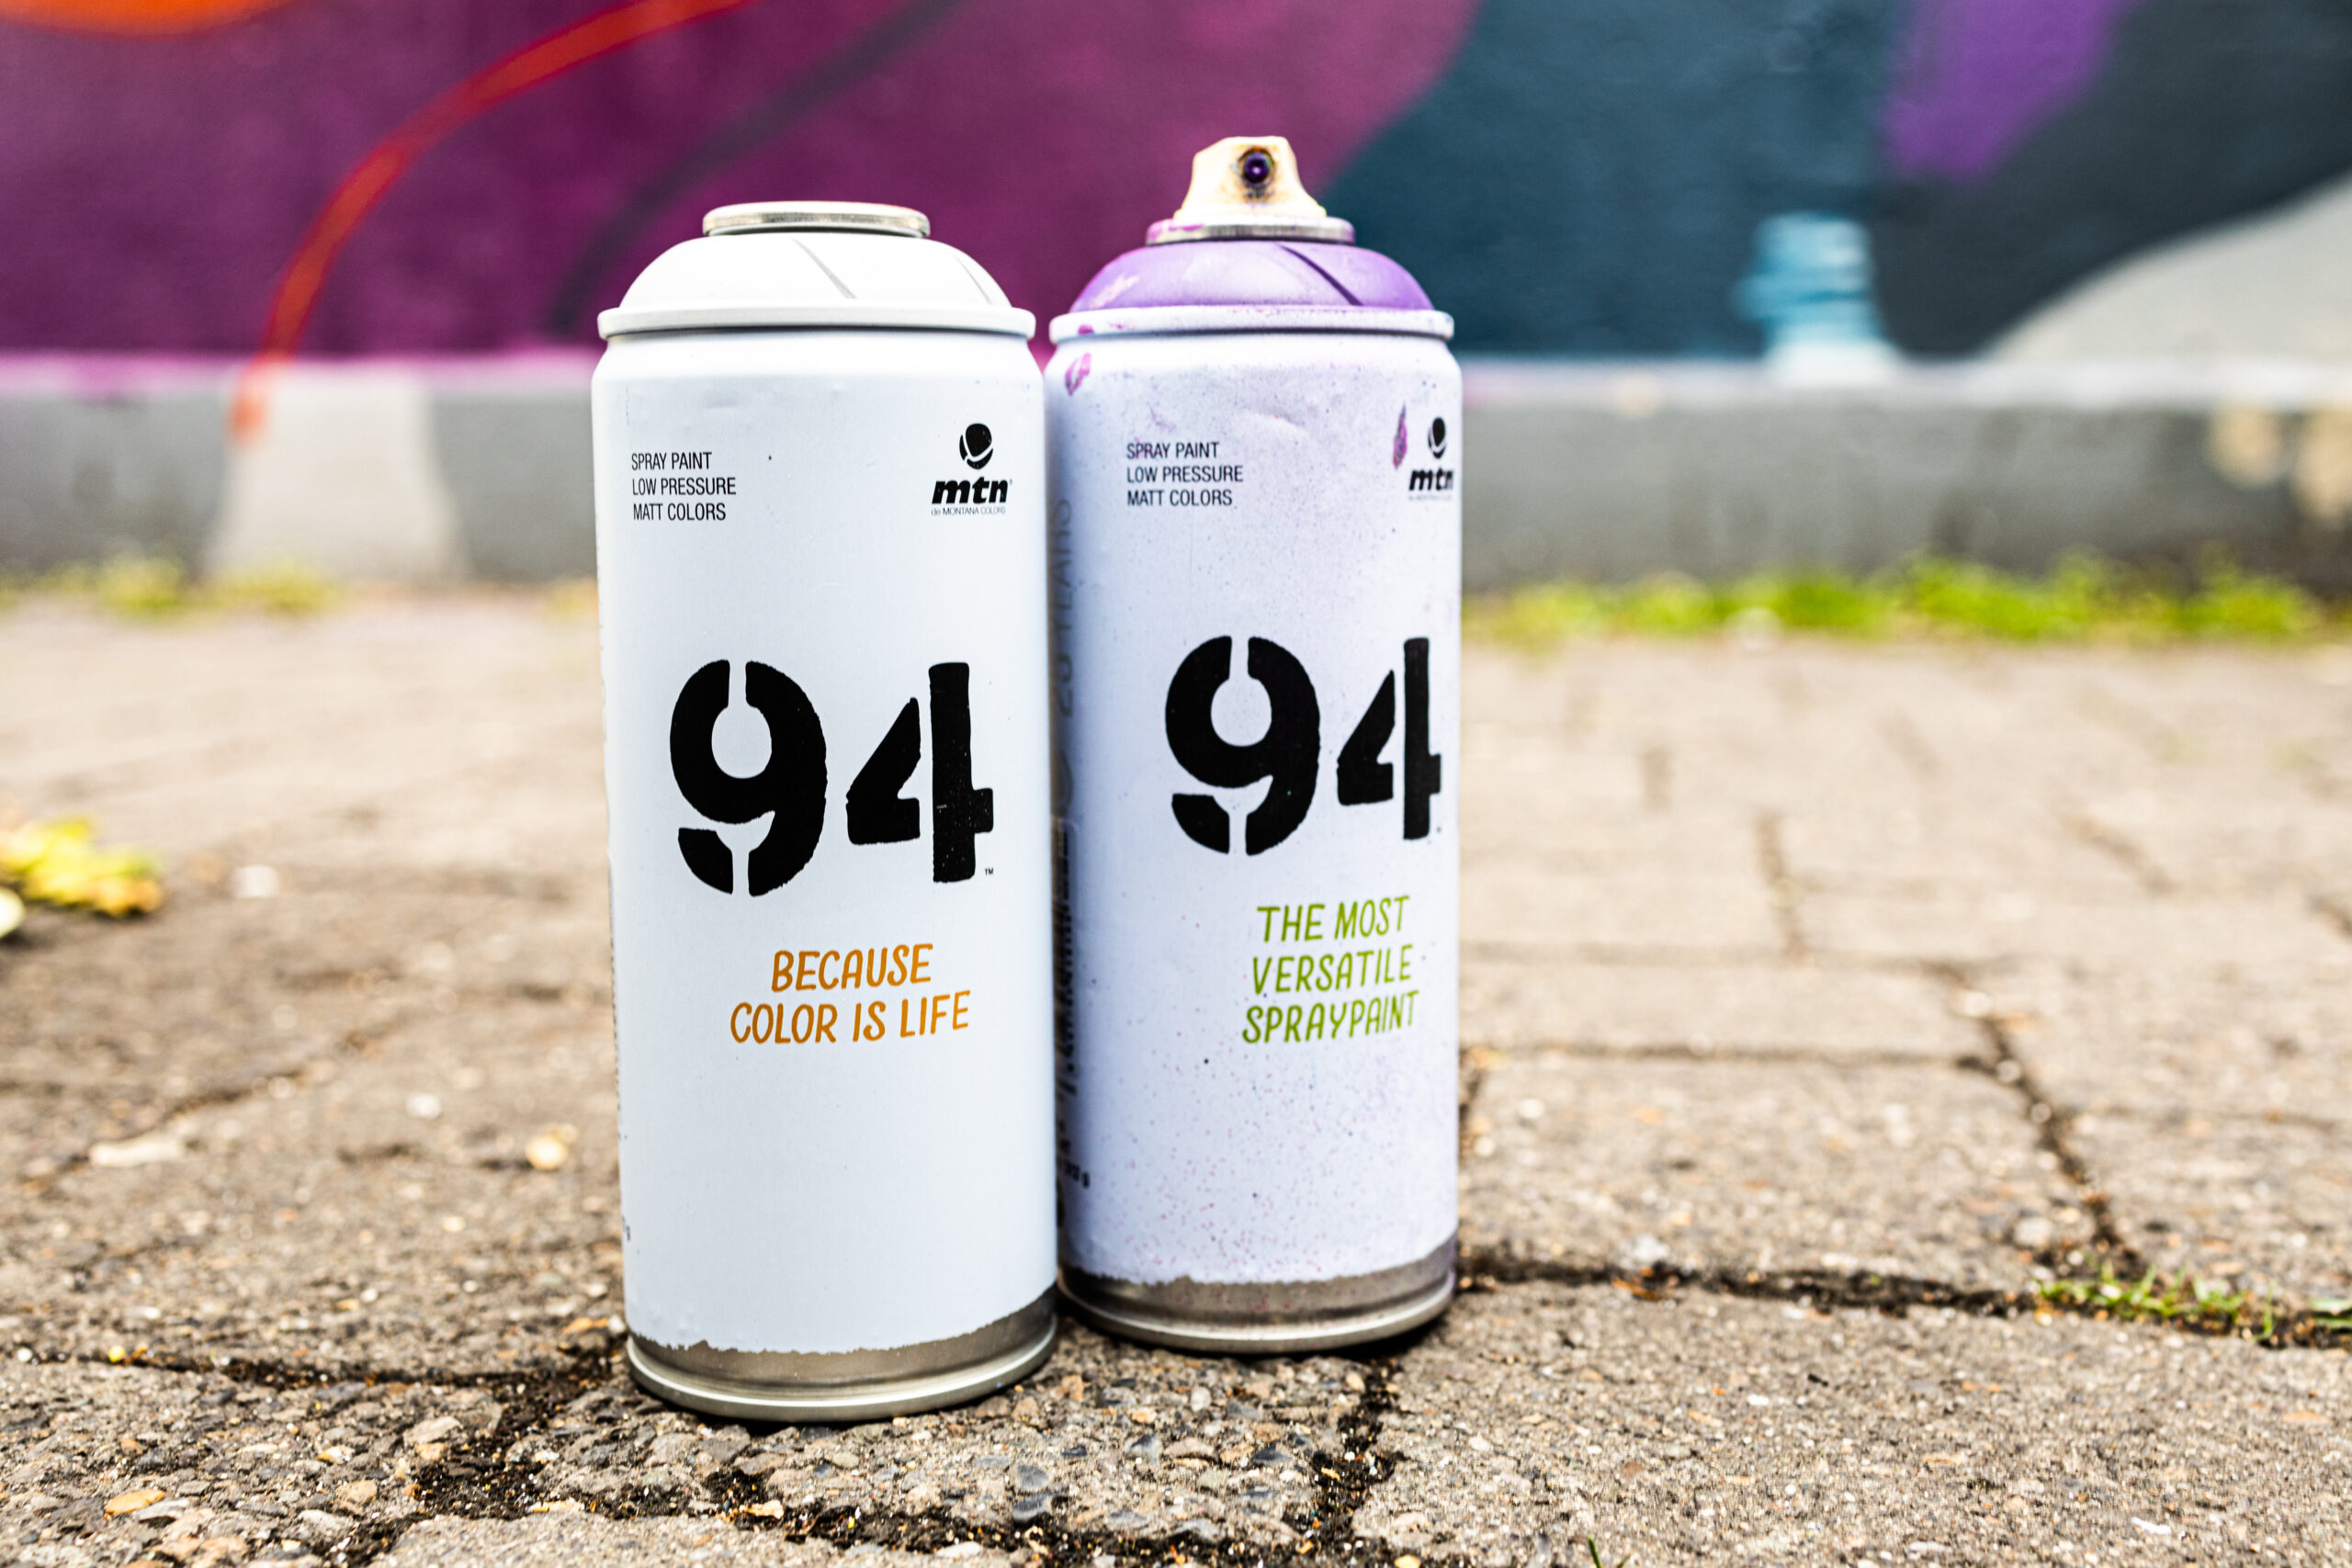 Two cans of spray paint for graffiti art